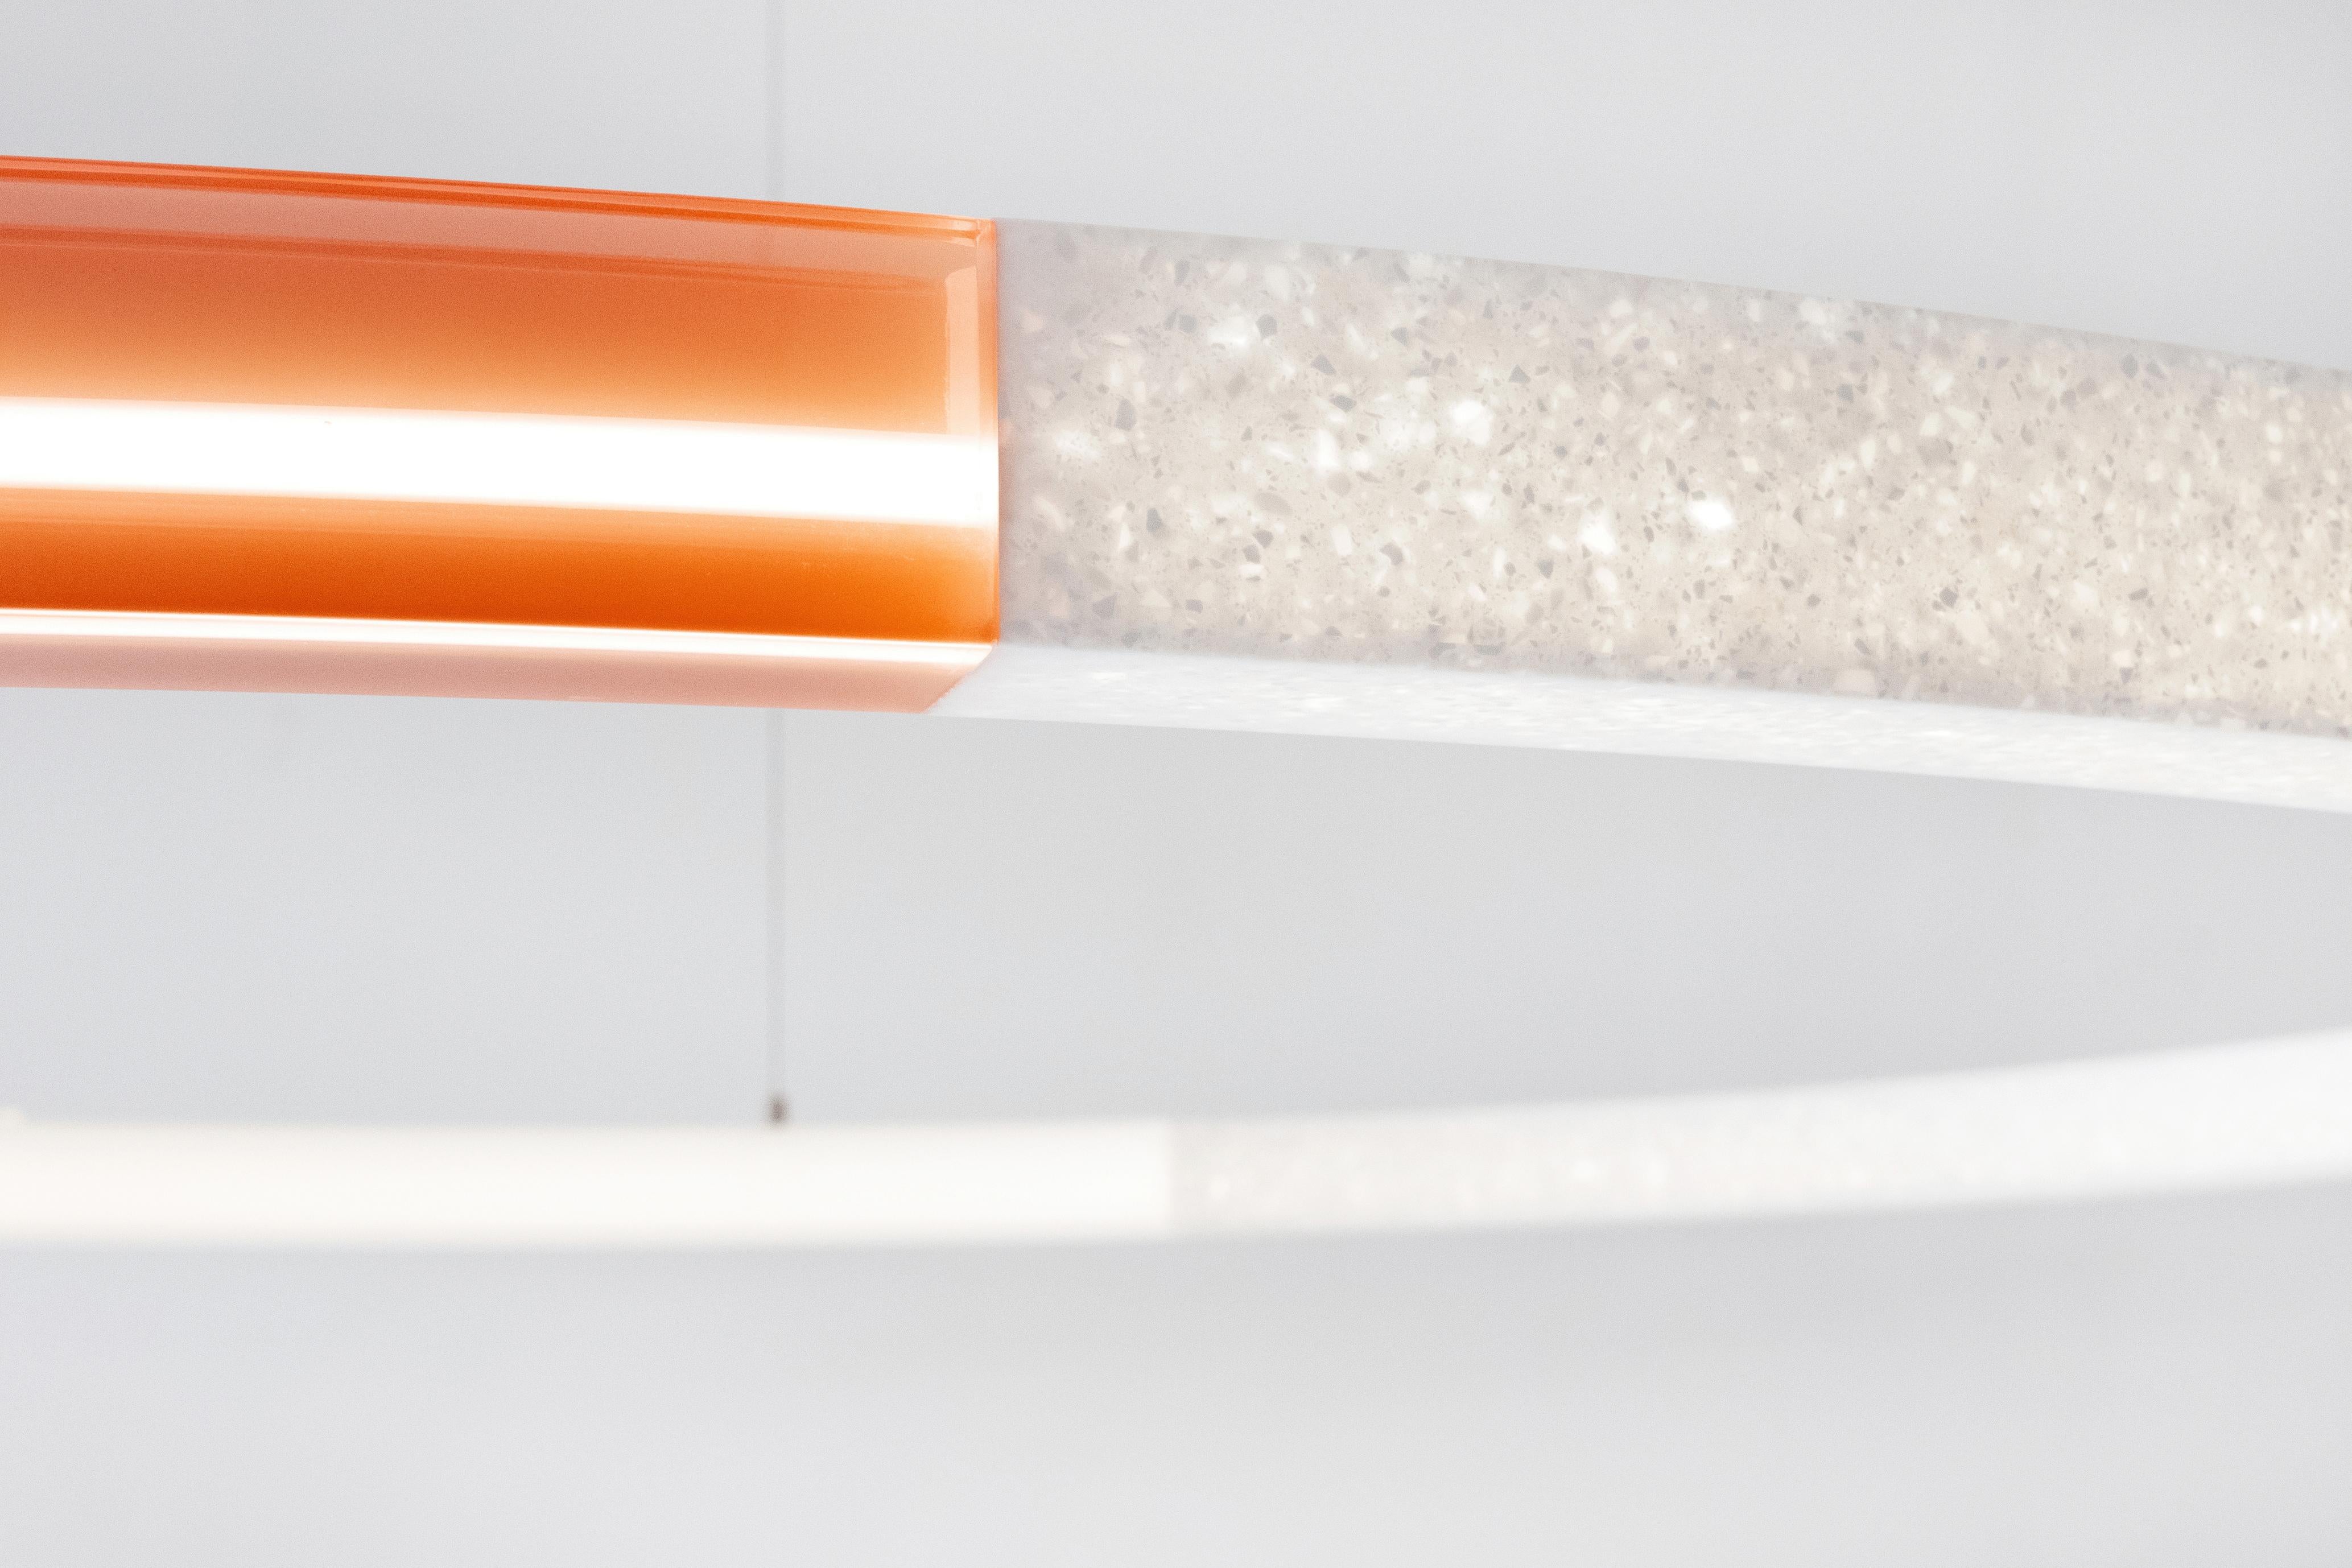 Sabine Marcelis chandelier from the Filter series in color red amber/ orange. 
Made from resin, high macs and neon,.
Manufactured by Sabine Marcelis.
Produced exclusively for SIDE GALLERY.
Made in, Rotterdam, The Netherlands in 2020.
High Macs,